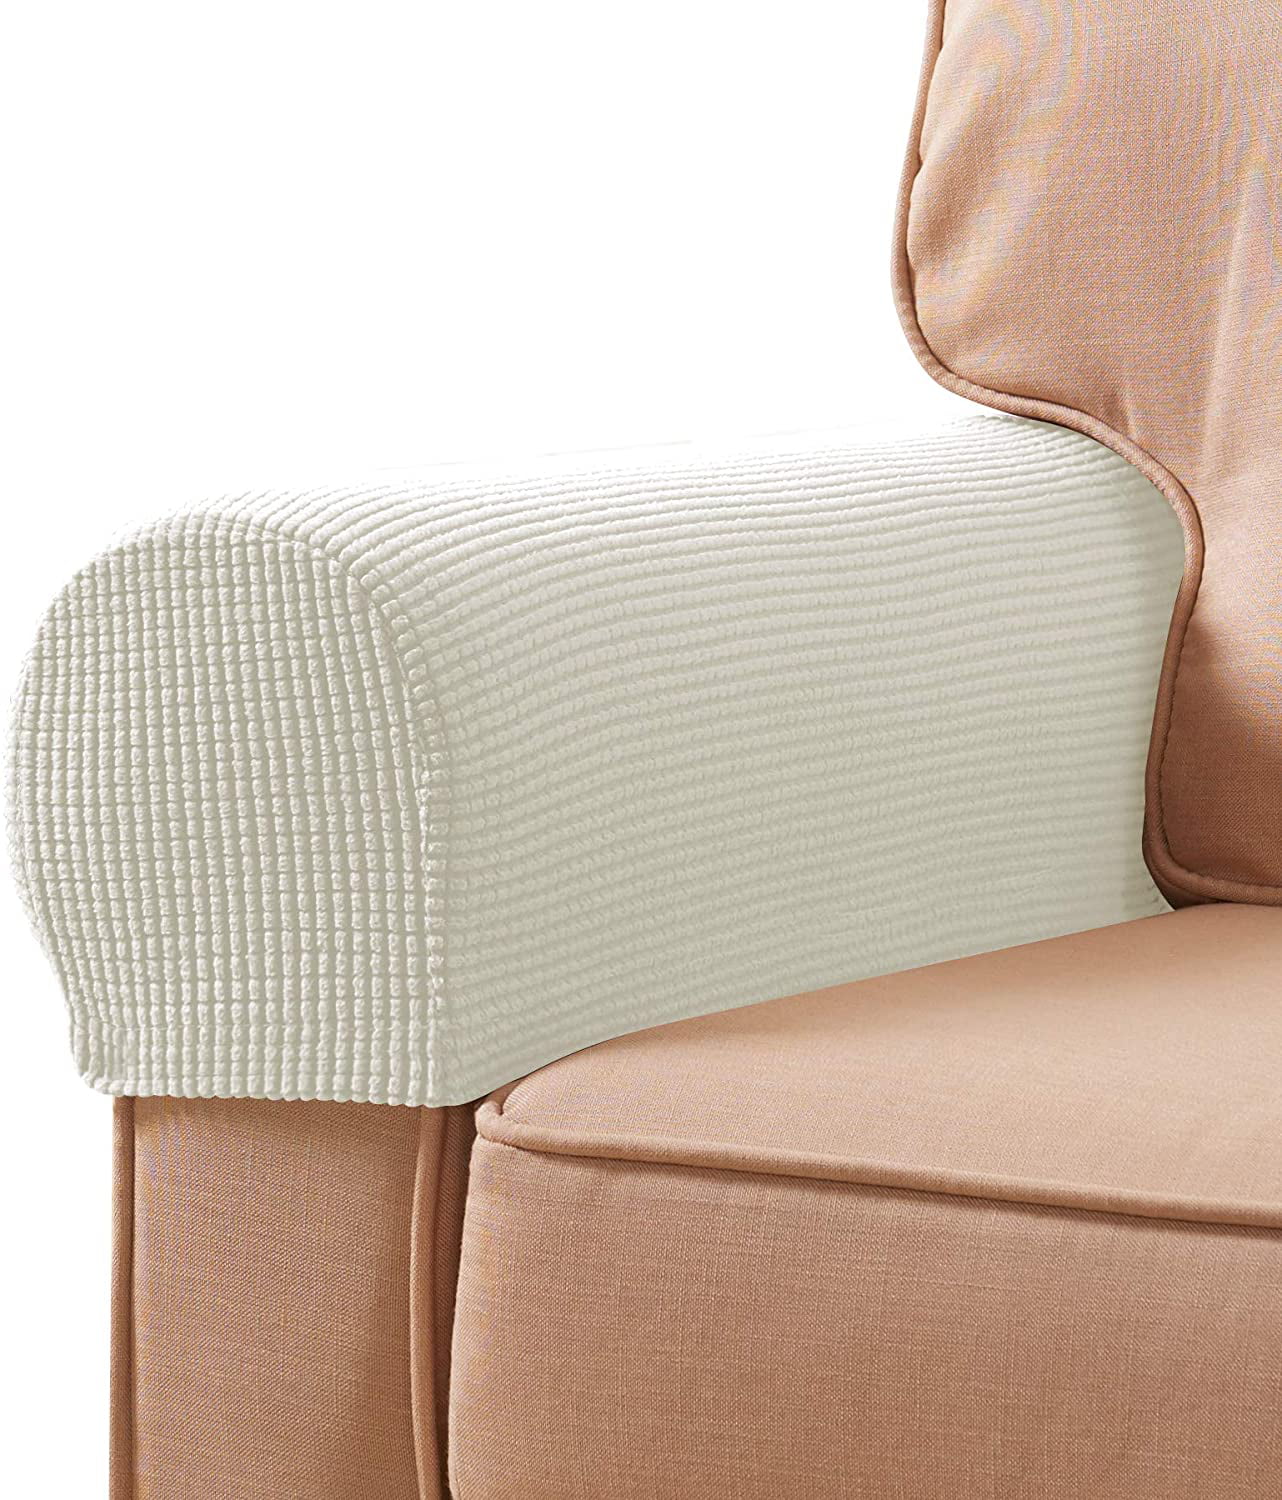 Details about   Pair Sofa Armrest Cover Protector Chair Couch Armchair Arm Rest  Waterproof 